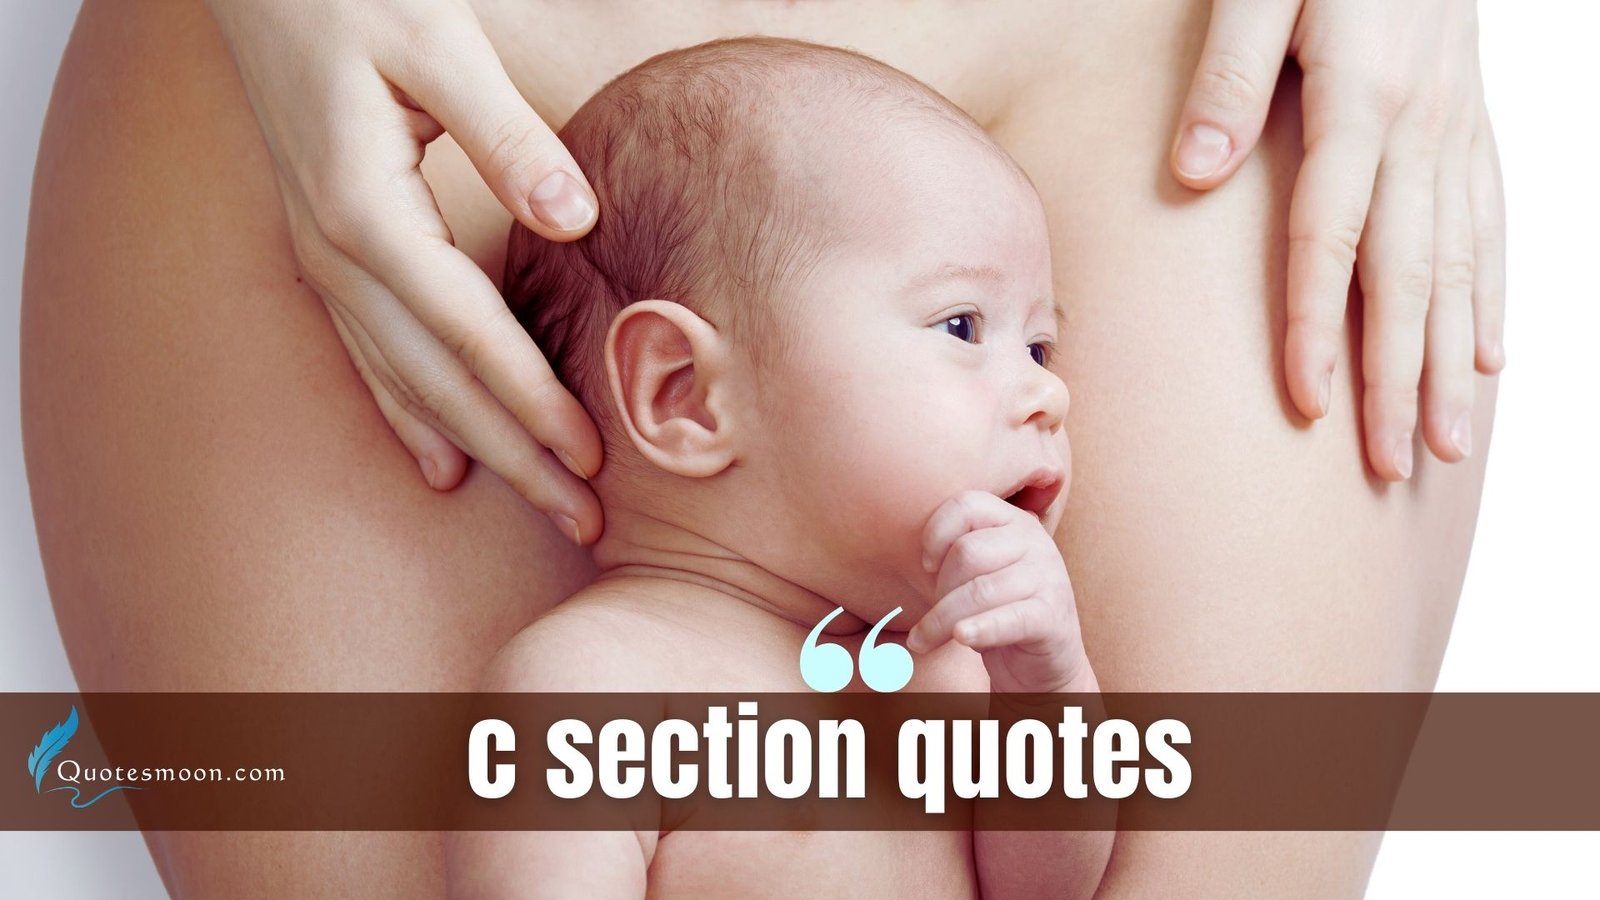 c section quotes images